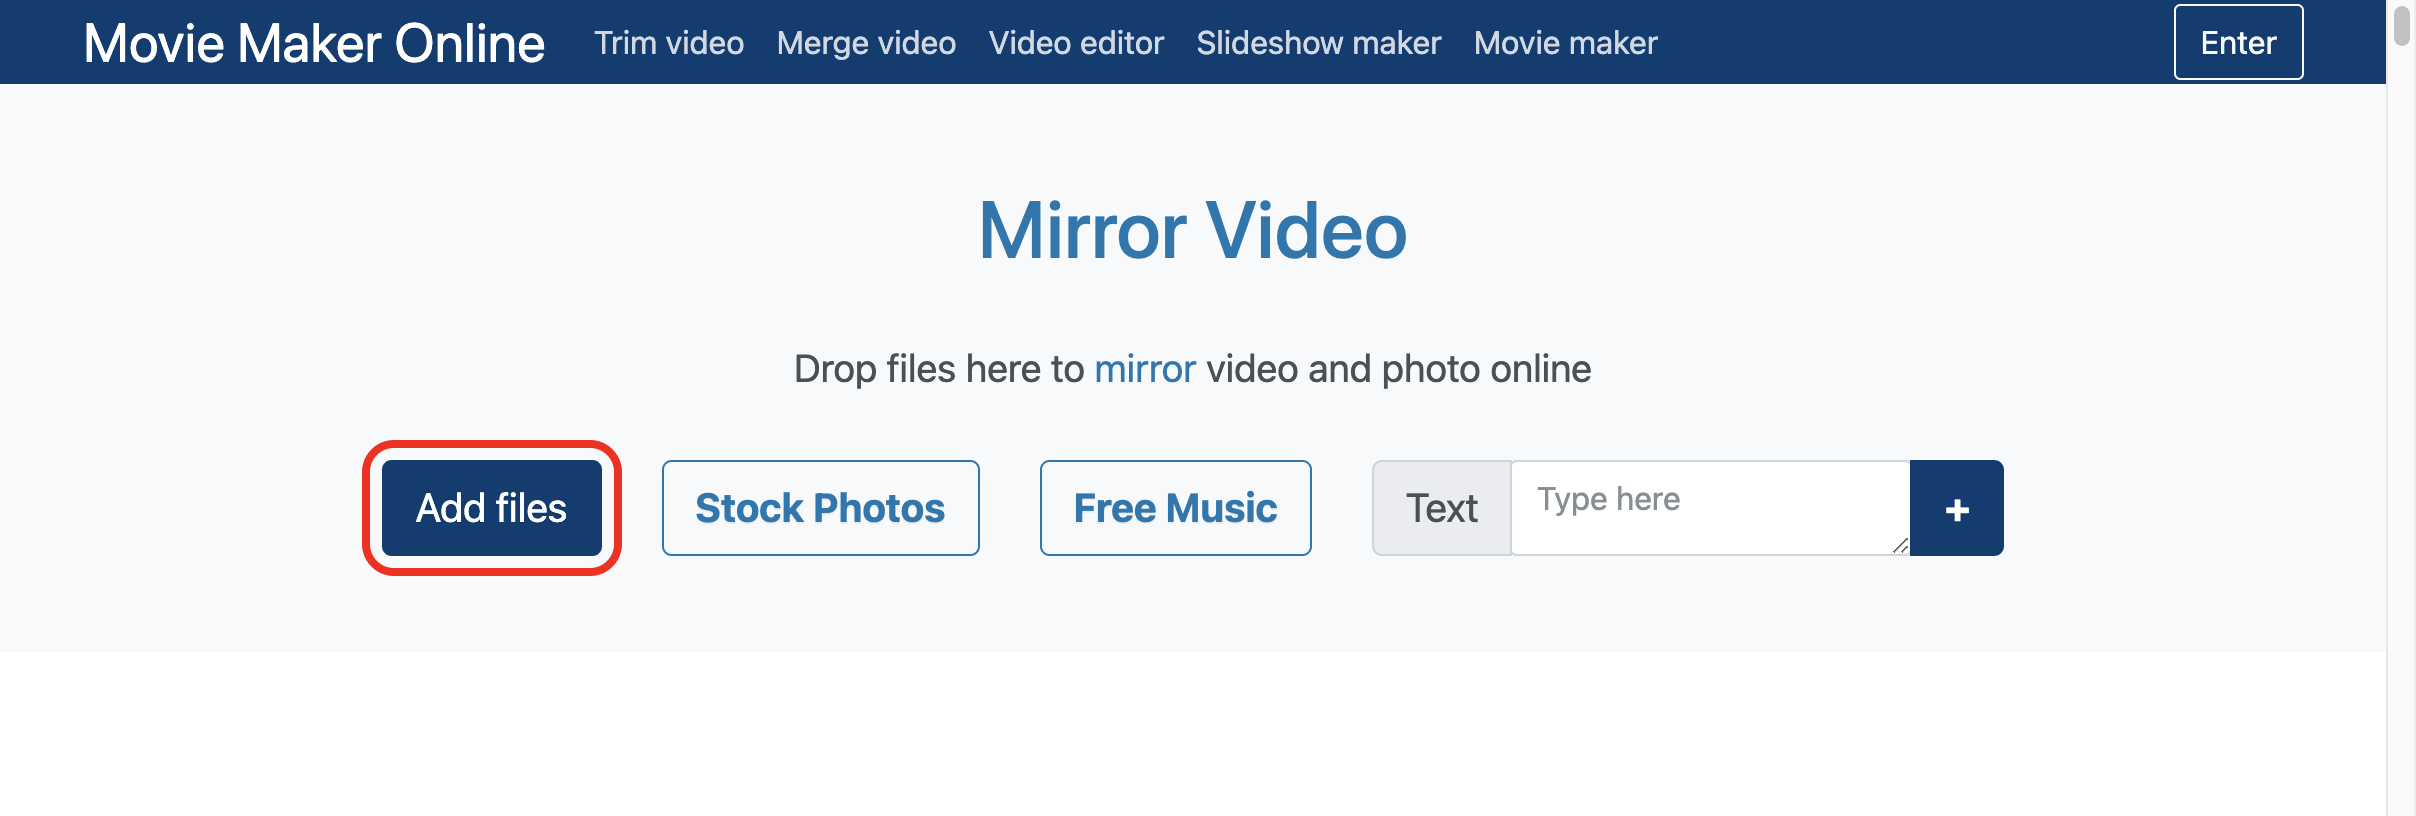 Add files to mirror